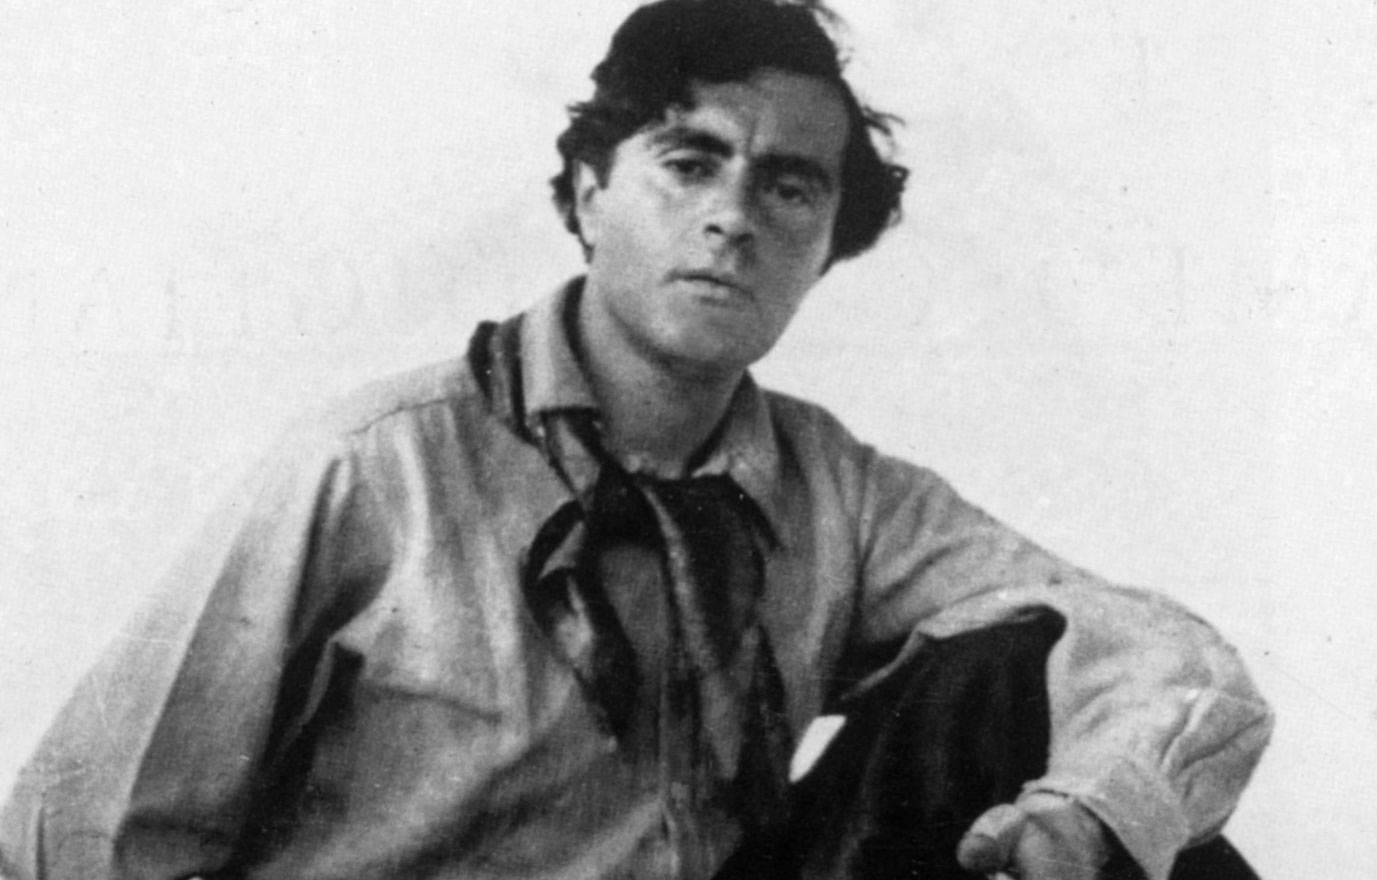 There is an estate of 6,000 documents on Modigliani, but it is not known whose they are: perhaps the state's